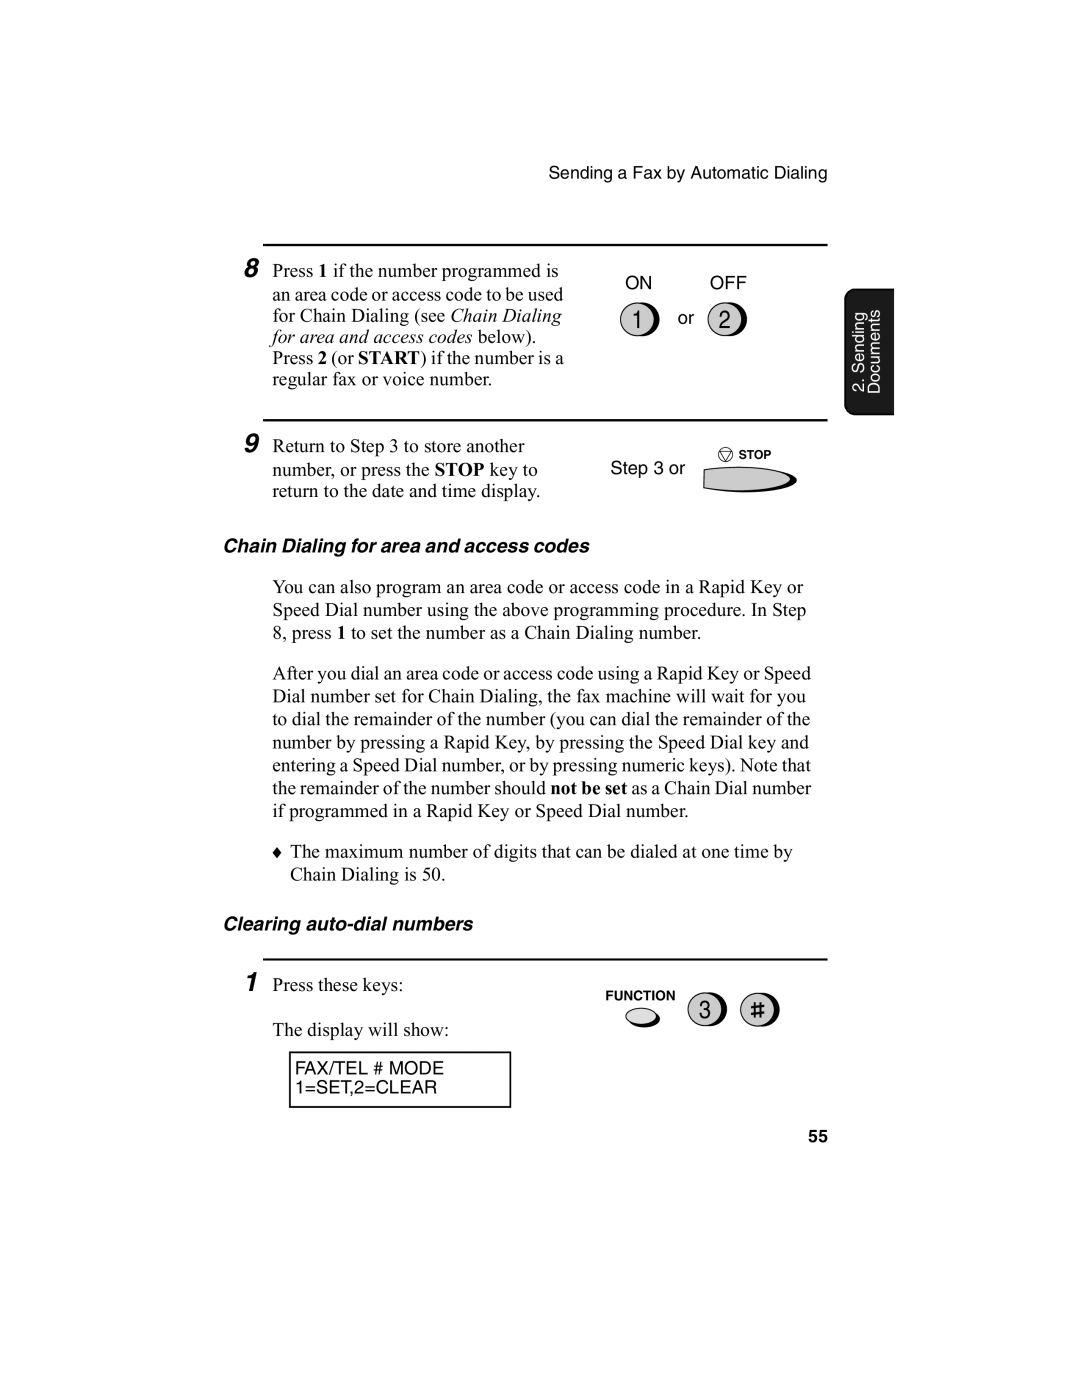 Sharp FO-2970M operation manual Chain Dialing for area and access codes, Clearing auto-dial numbers 